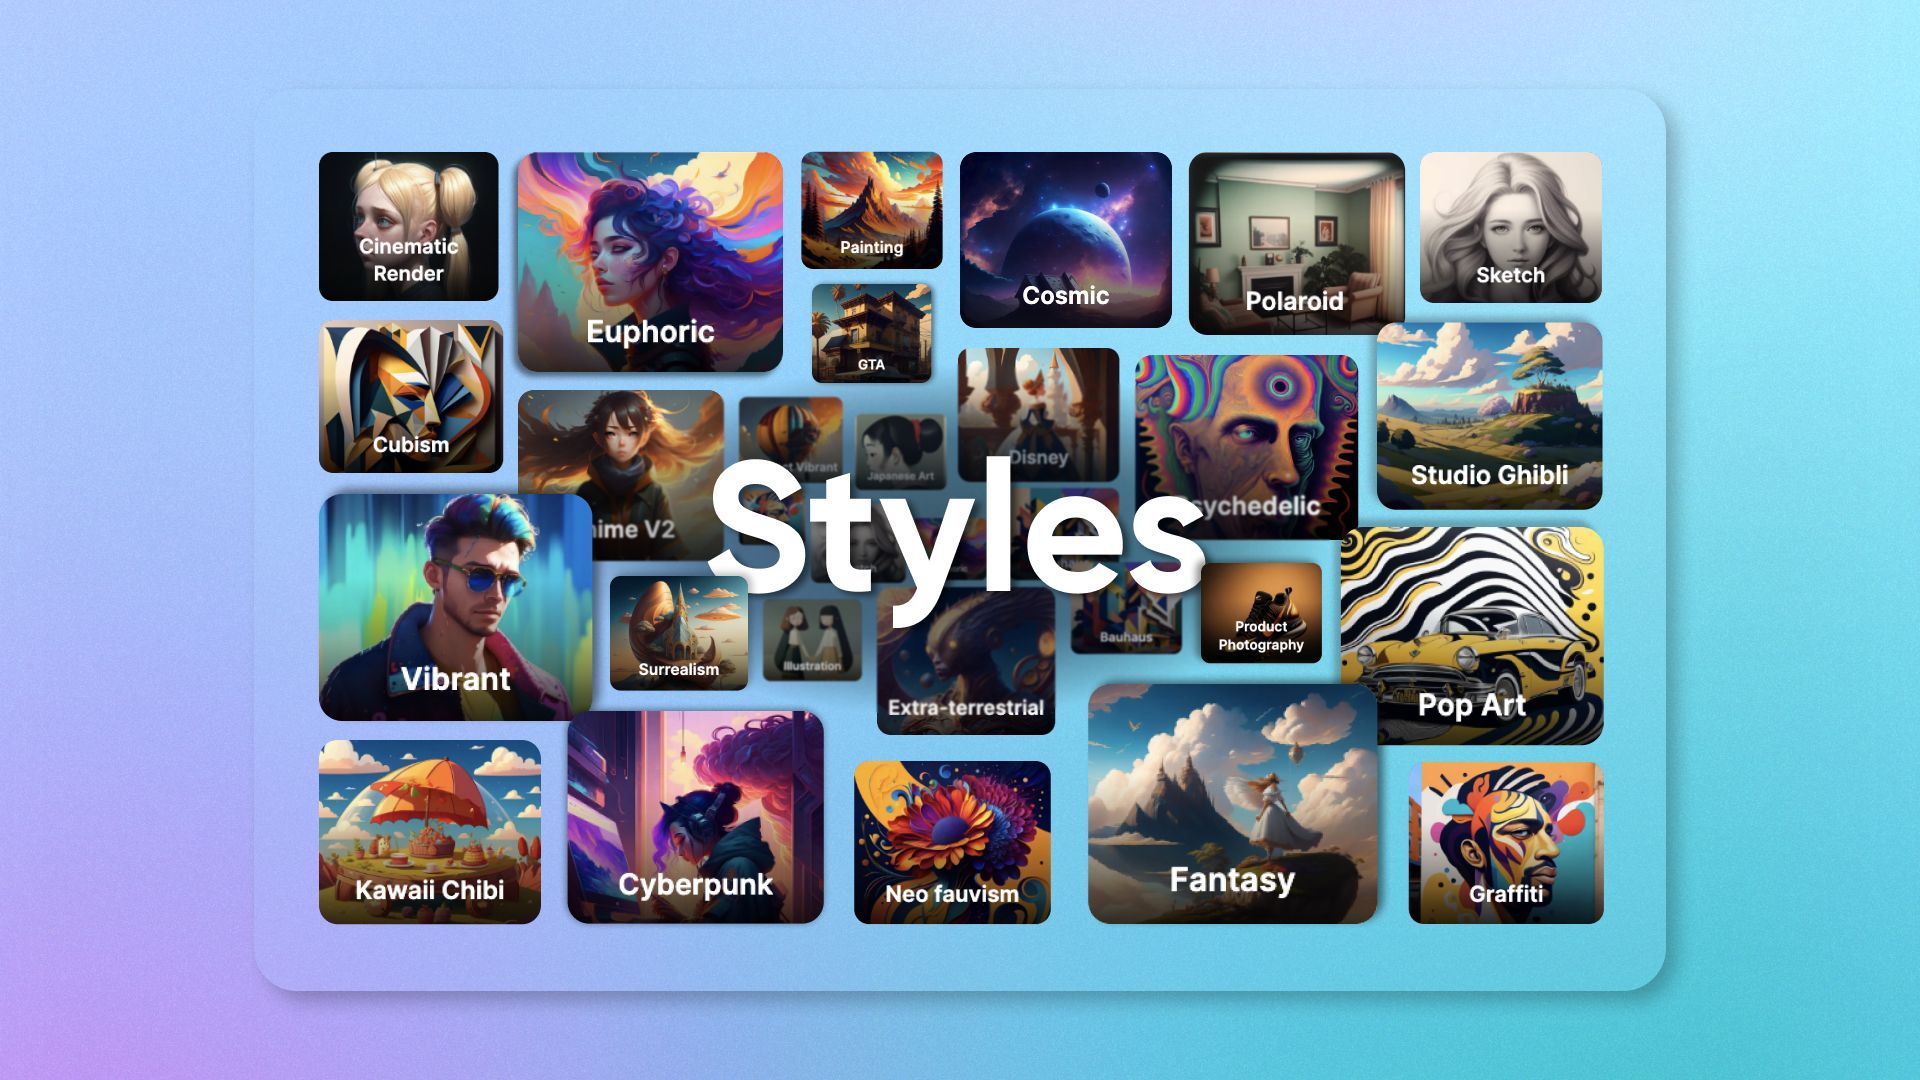 image displaying a diverse array of artistic styles and genres